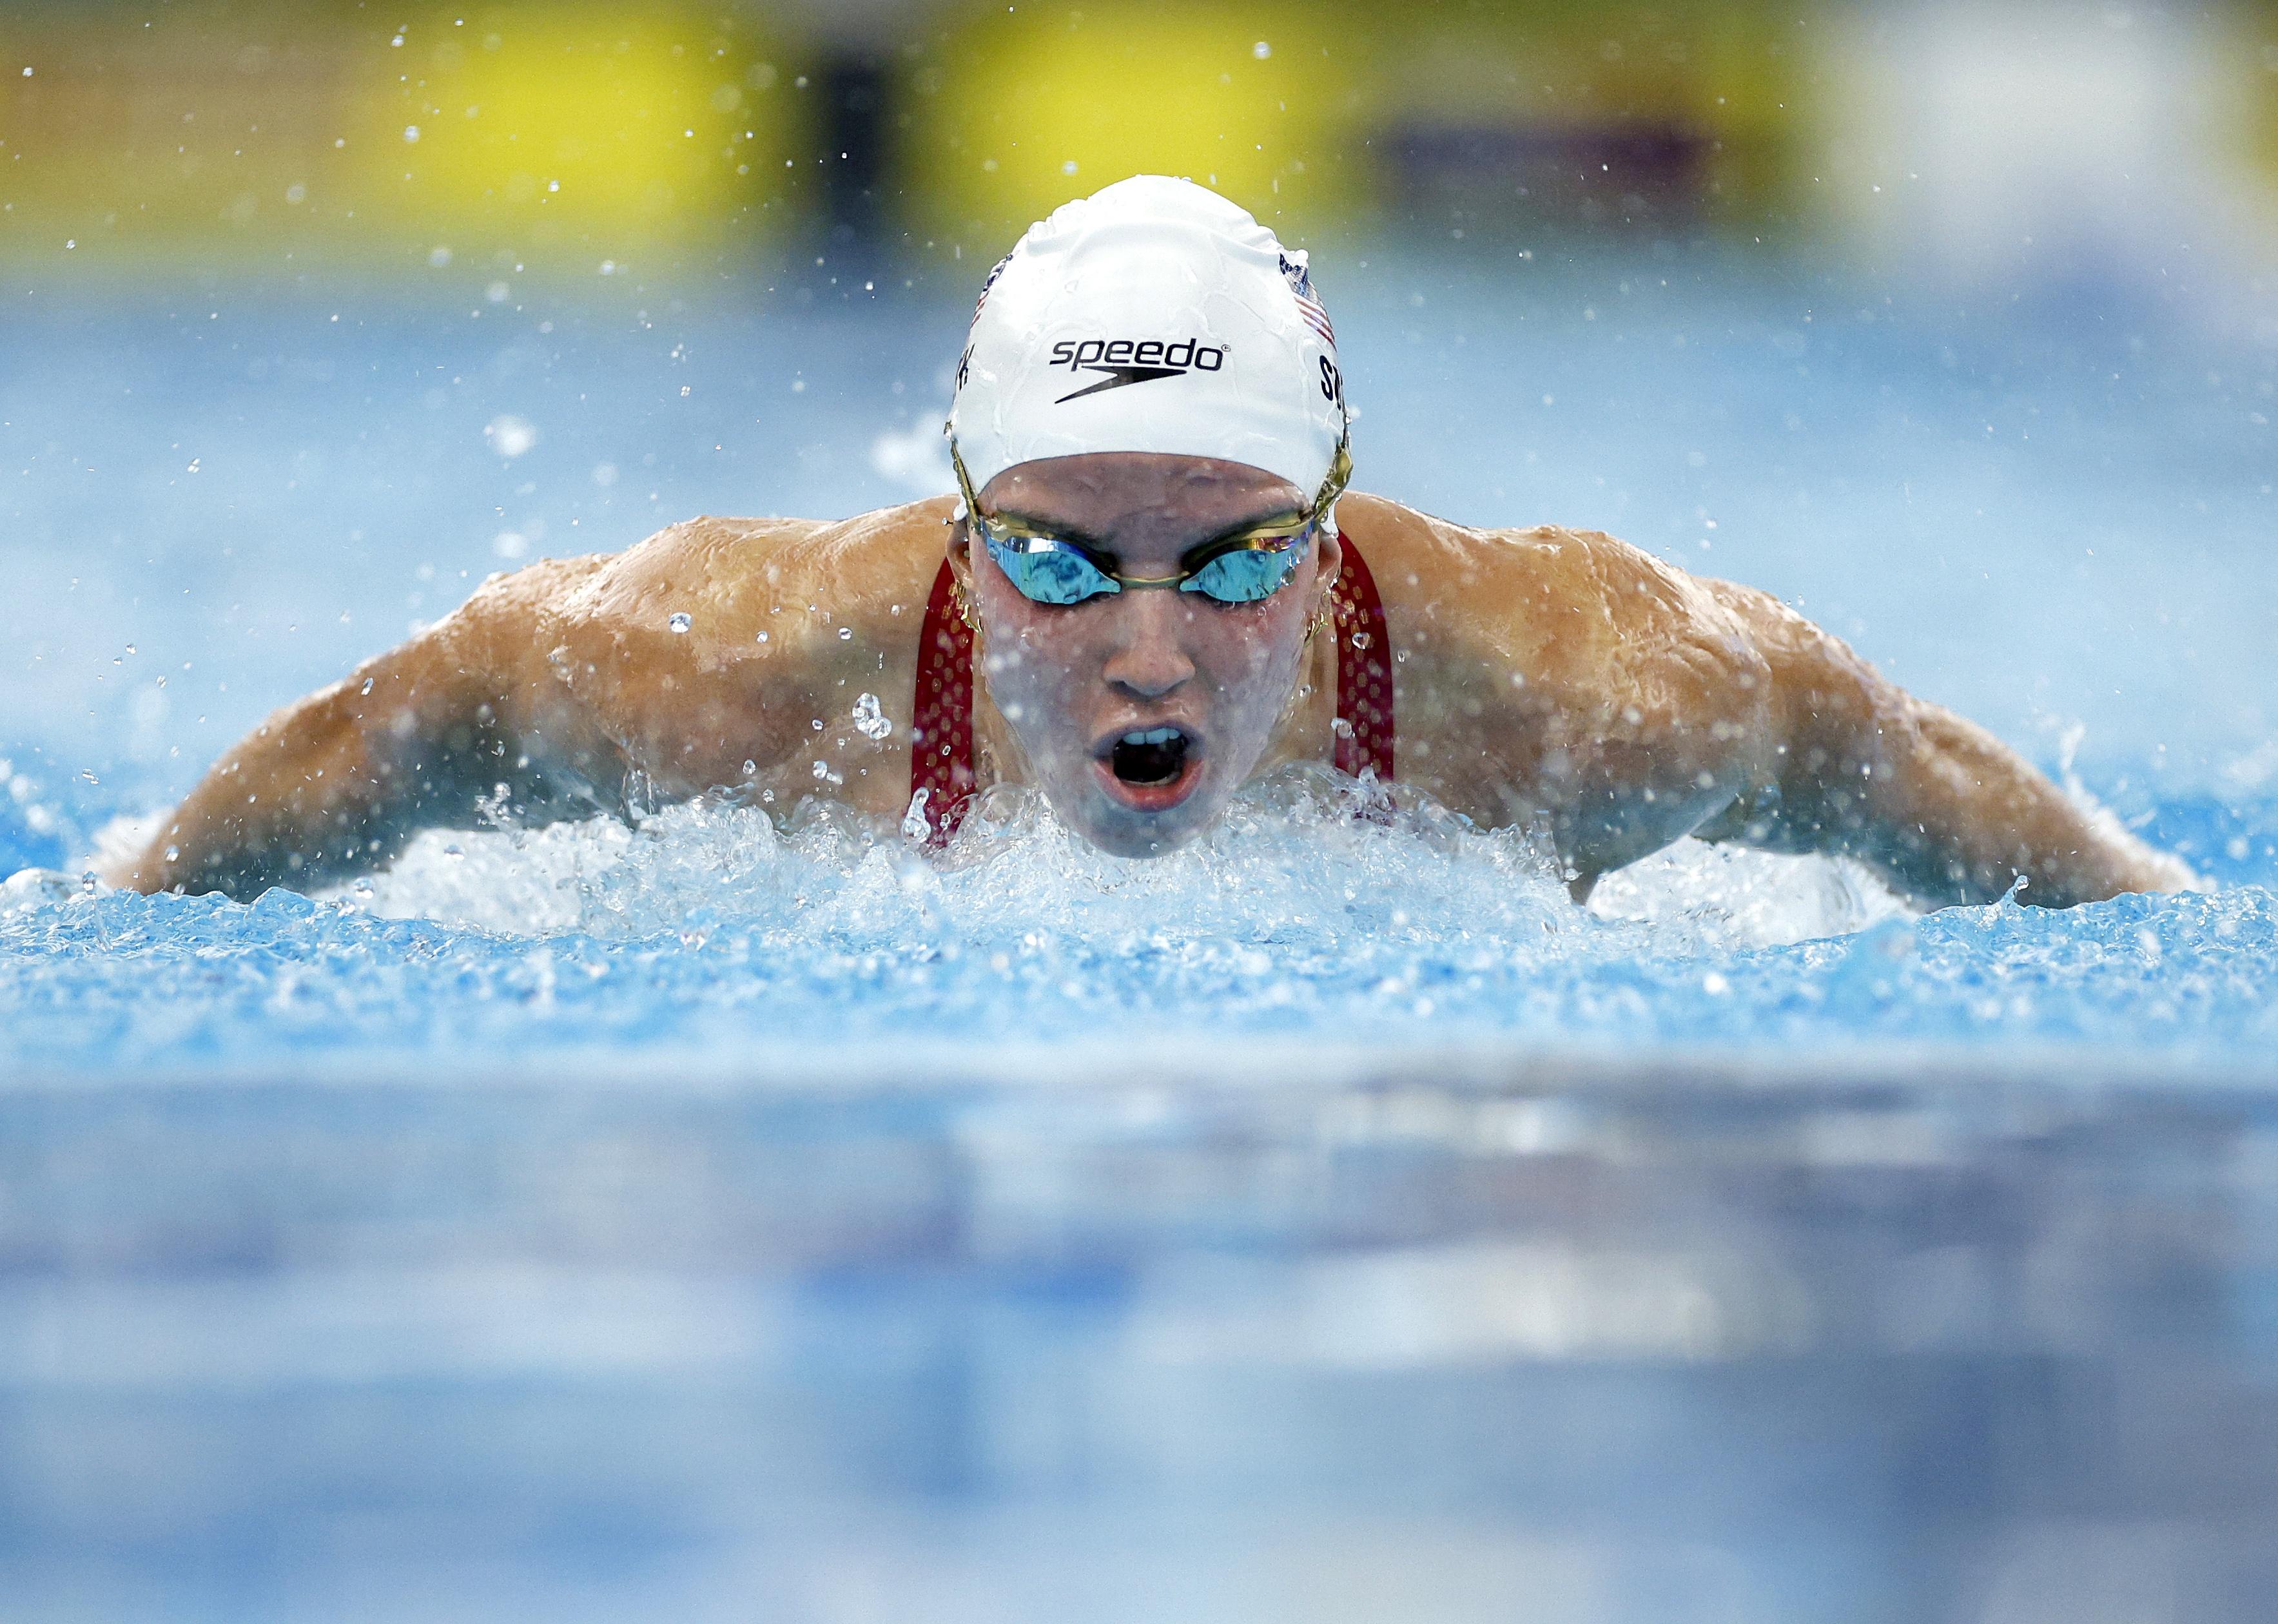 Regan Smith competes in the Women's 200m Butterfly Heat during the Toyota U.S. Open.